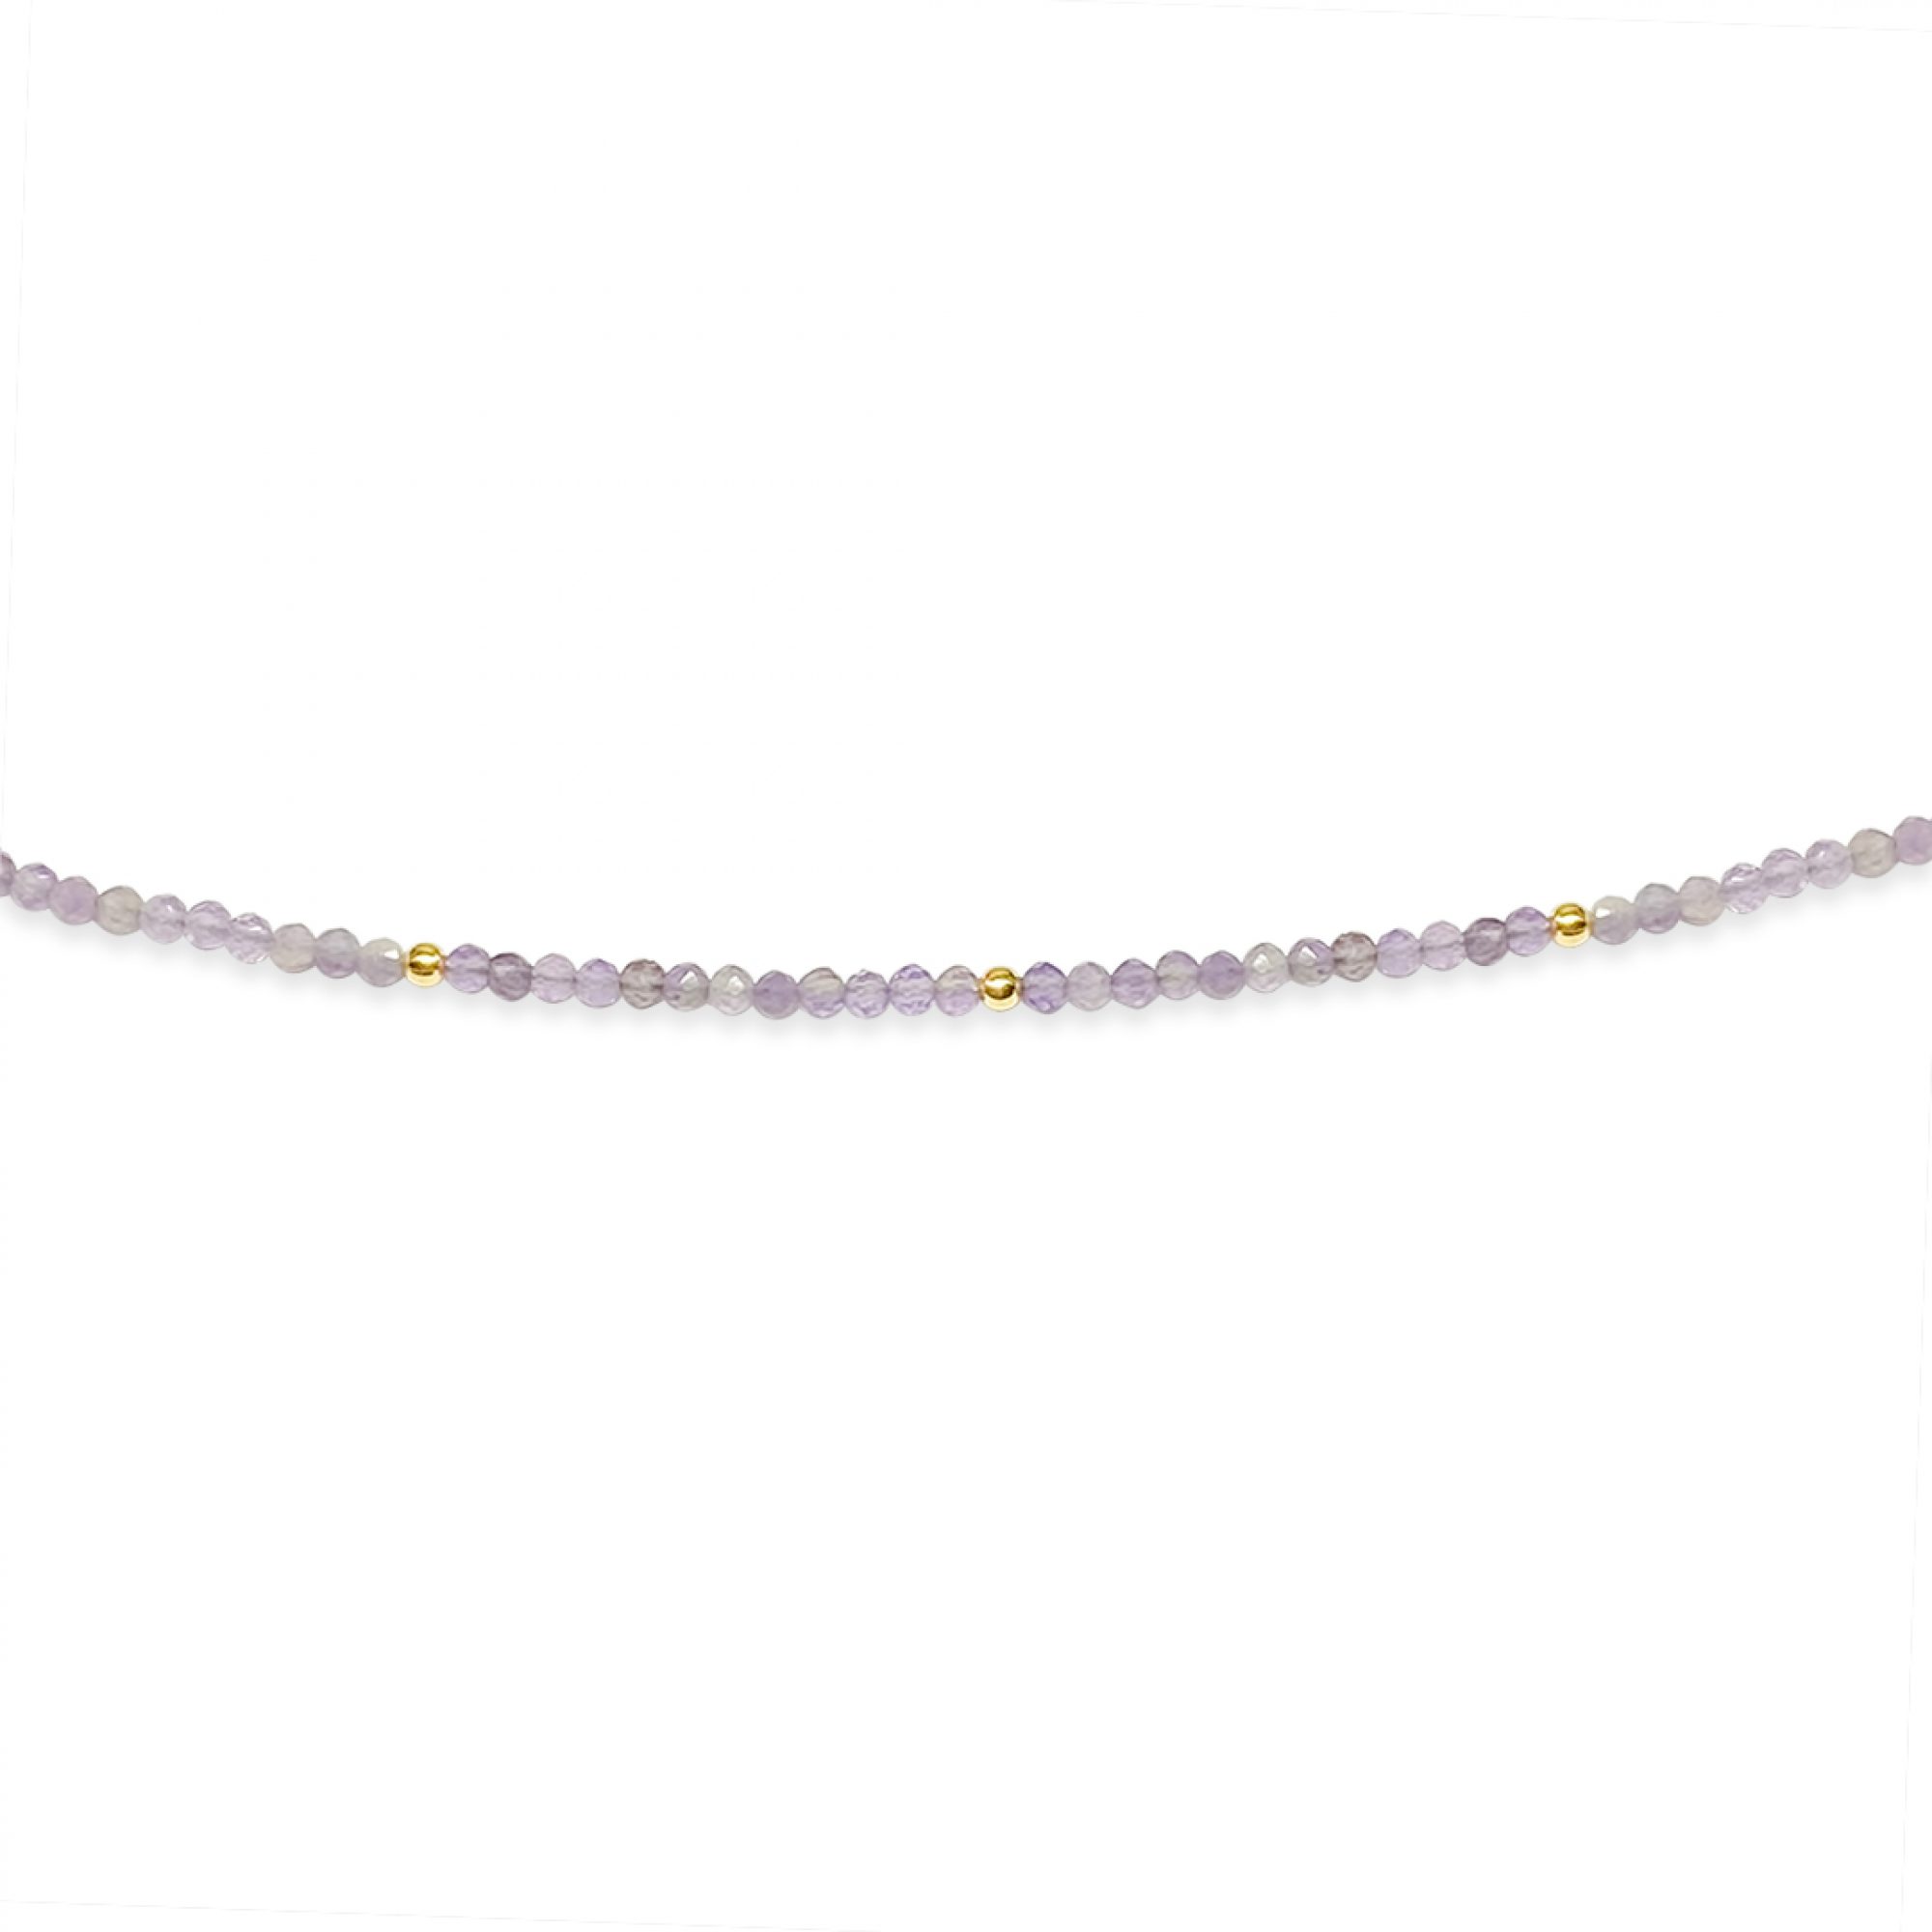 Gold plated anklet with amethyst beads